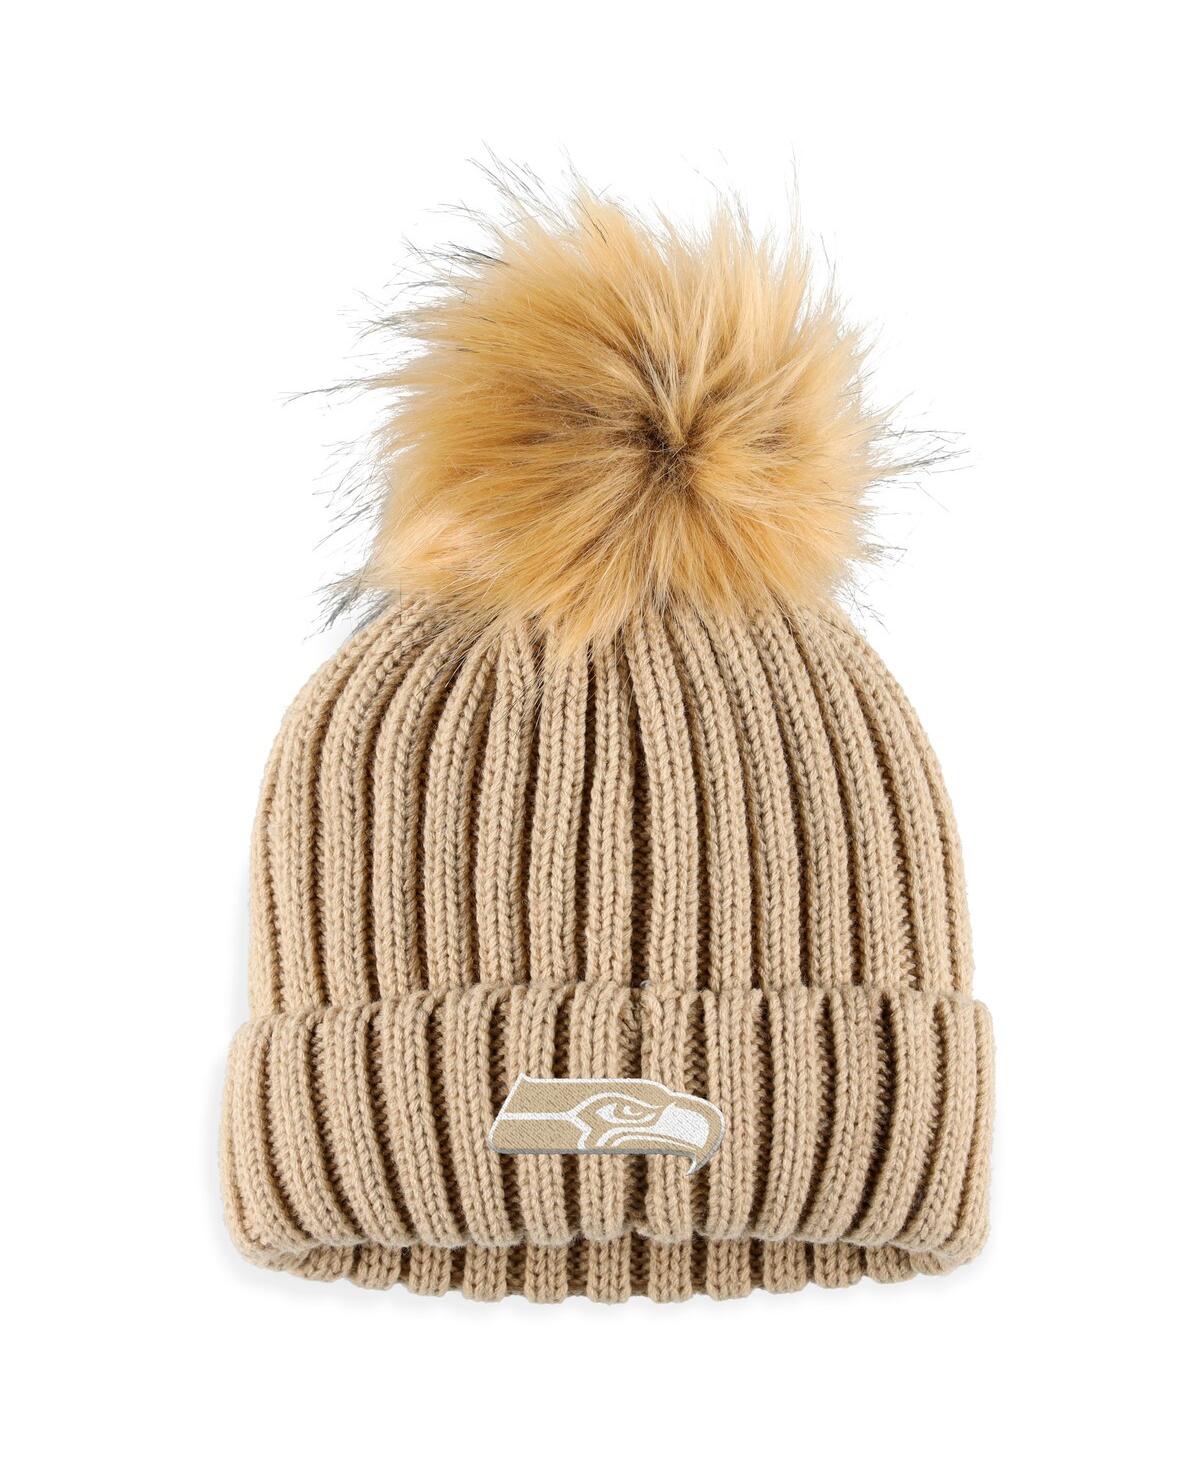 Wear By Erin Andrews Women's  Natural Seattle Seahawks Neutral Cuffed Knit Hat With Pom